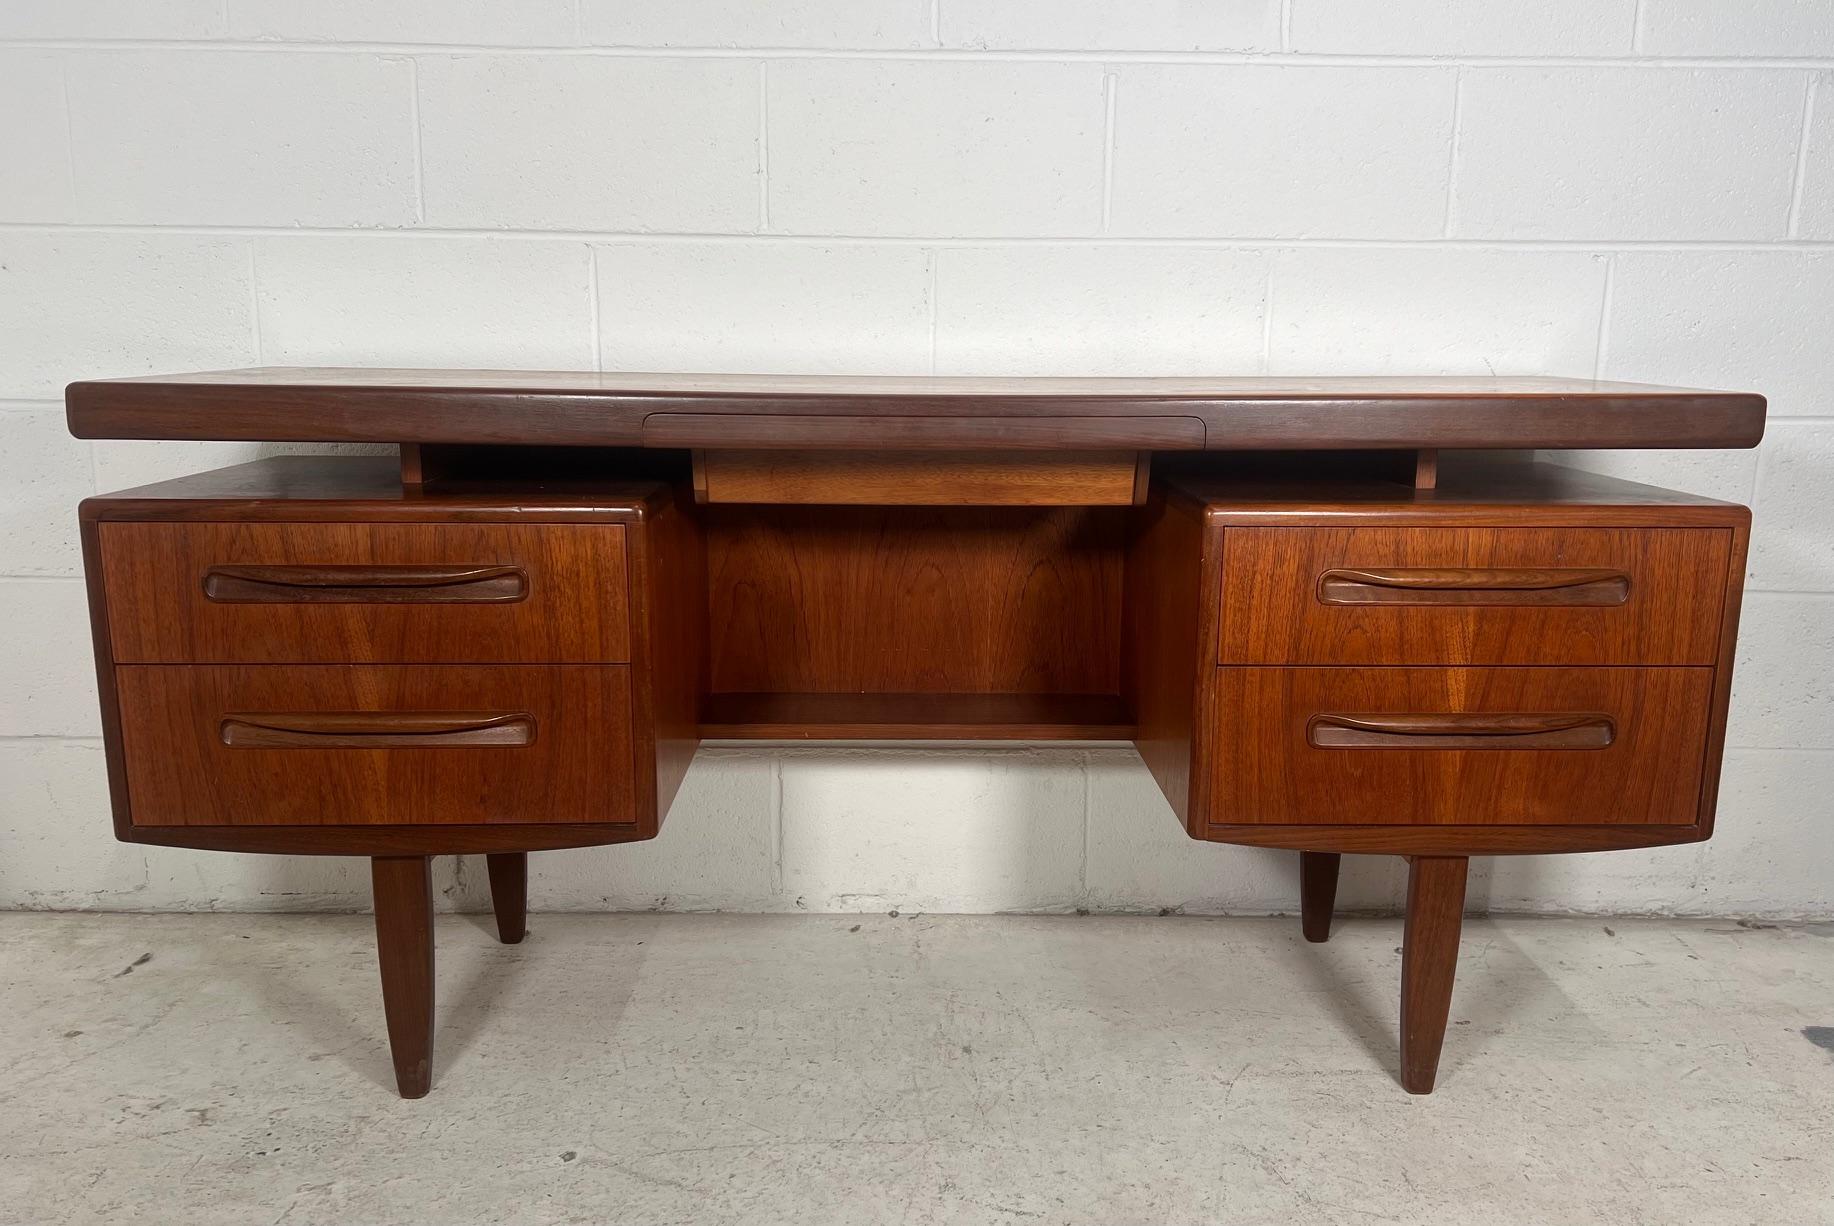 Fantastic mid-century teak vanity or desk. Designed in the 60s by Victor Bramwell Wilkins for G Plan's Fresco Range. Danish Modern in style. Secret drawer has original black fabric. Gorgeous continuous grain pattern on the front of the drawers.